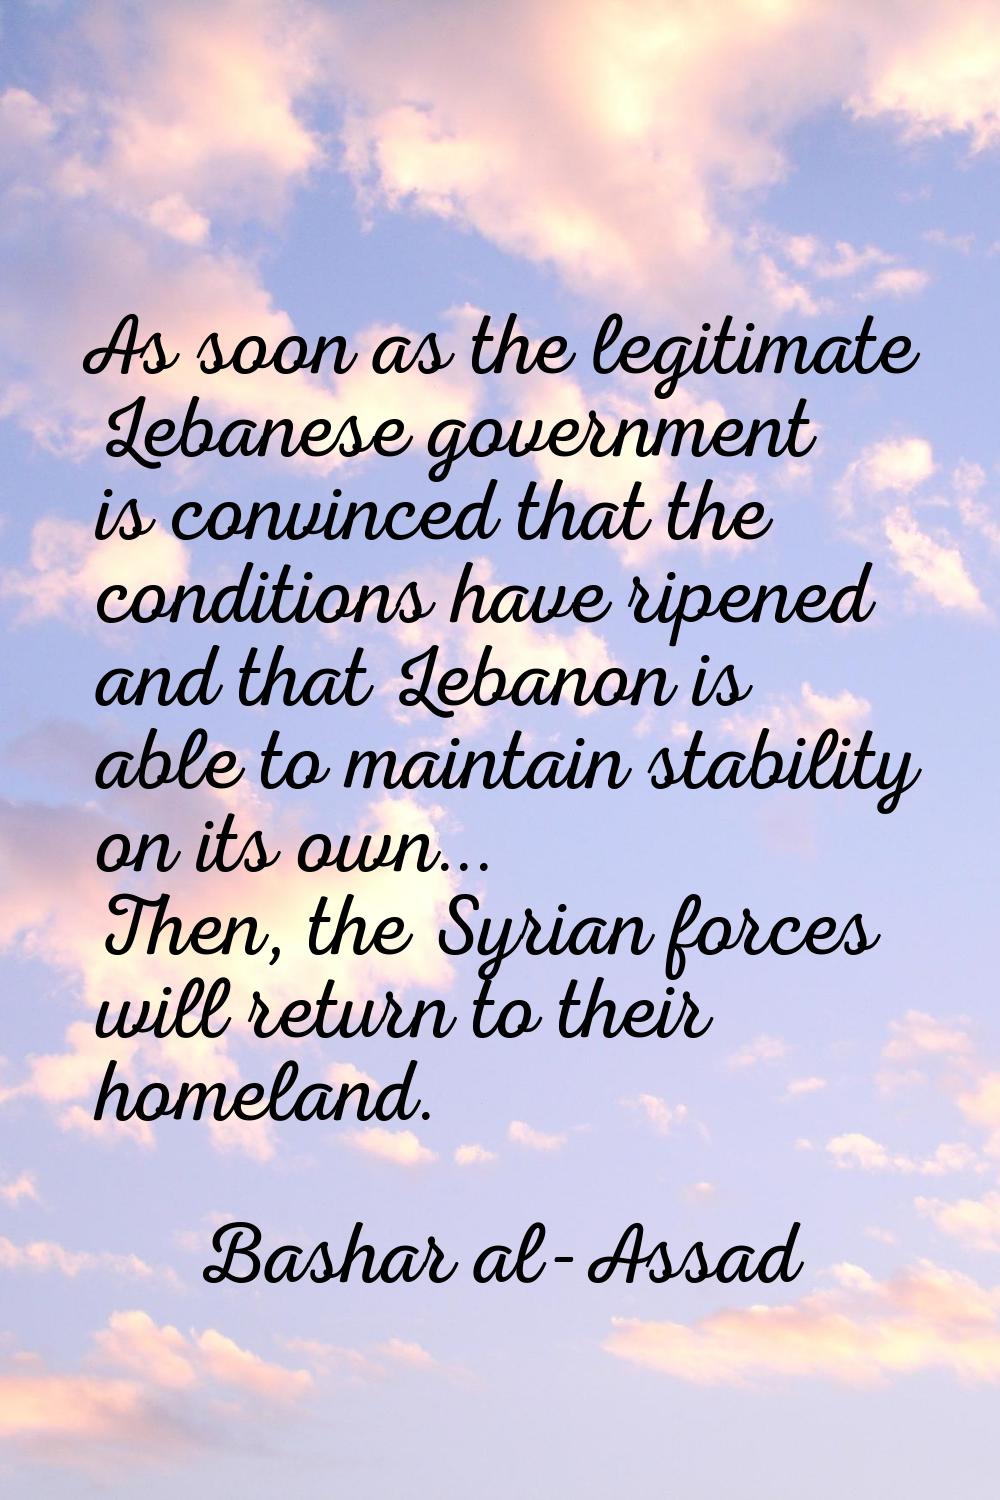 As soon as the legitimate Lebanese government is convinced that the conditions have ripened and tha